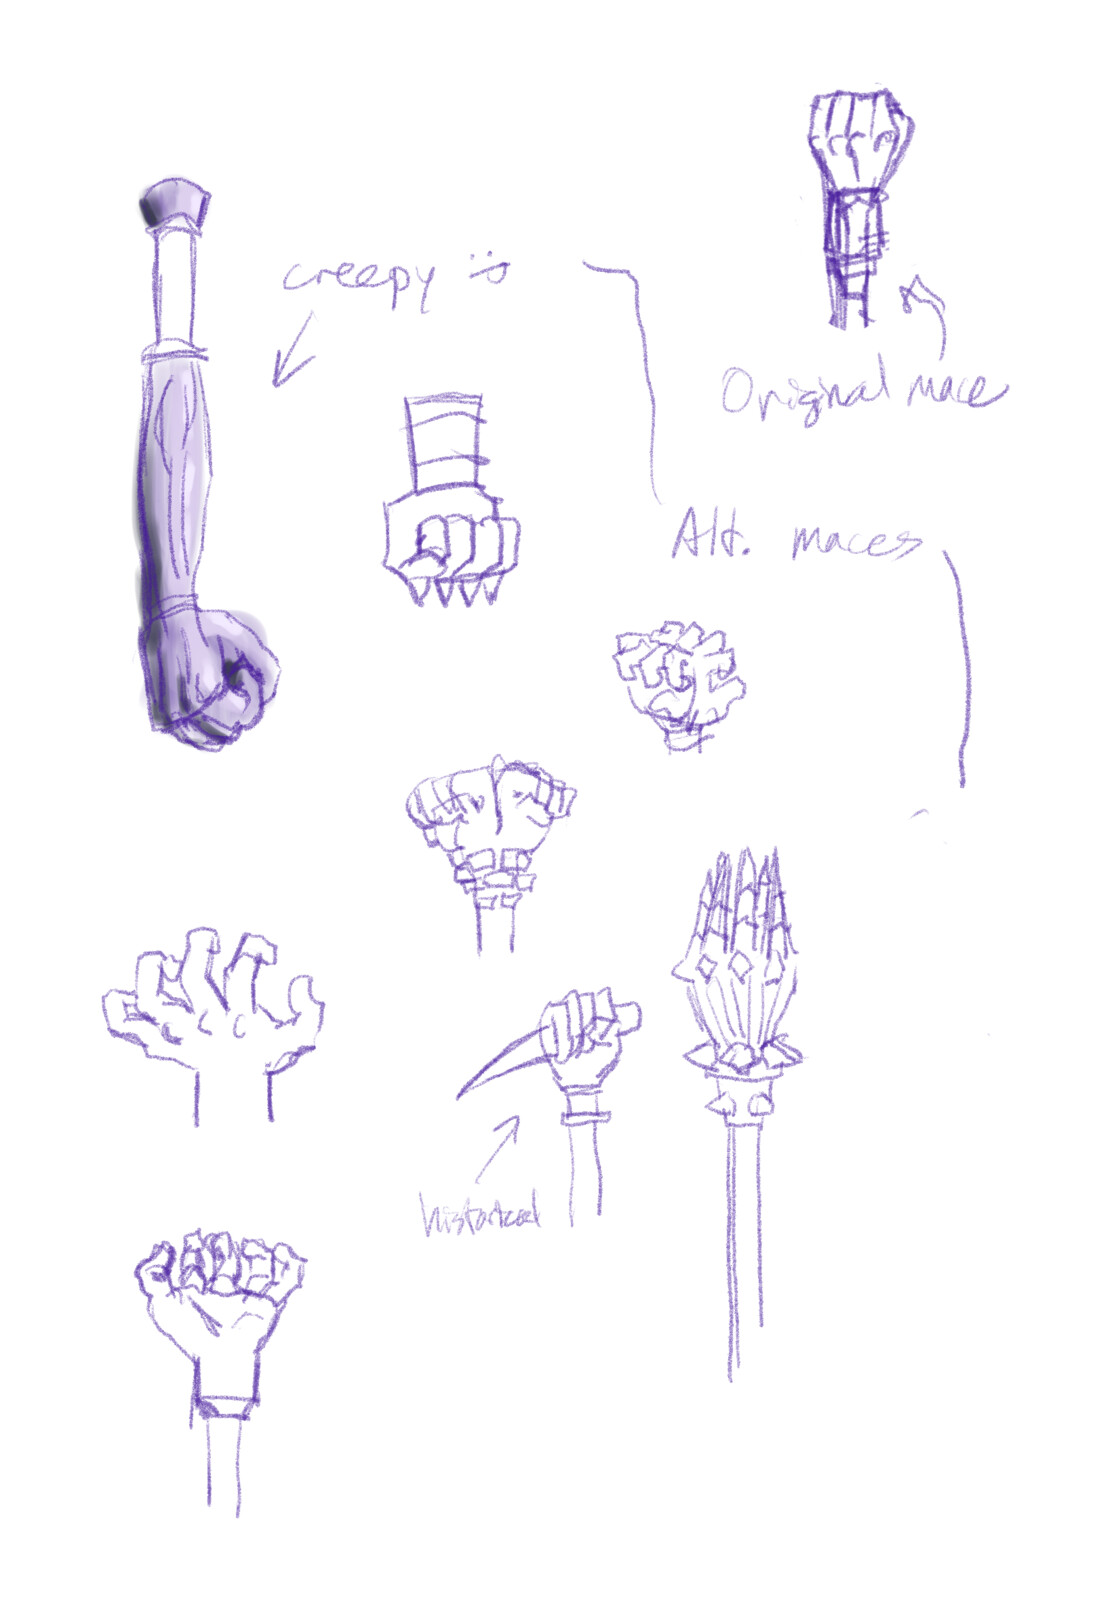 I was asked to create a mace based on a fist; the player liked the one closest to the god's symbol